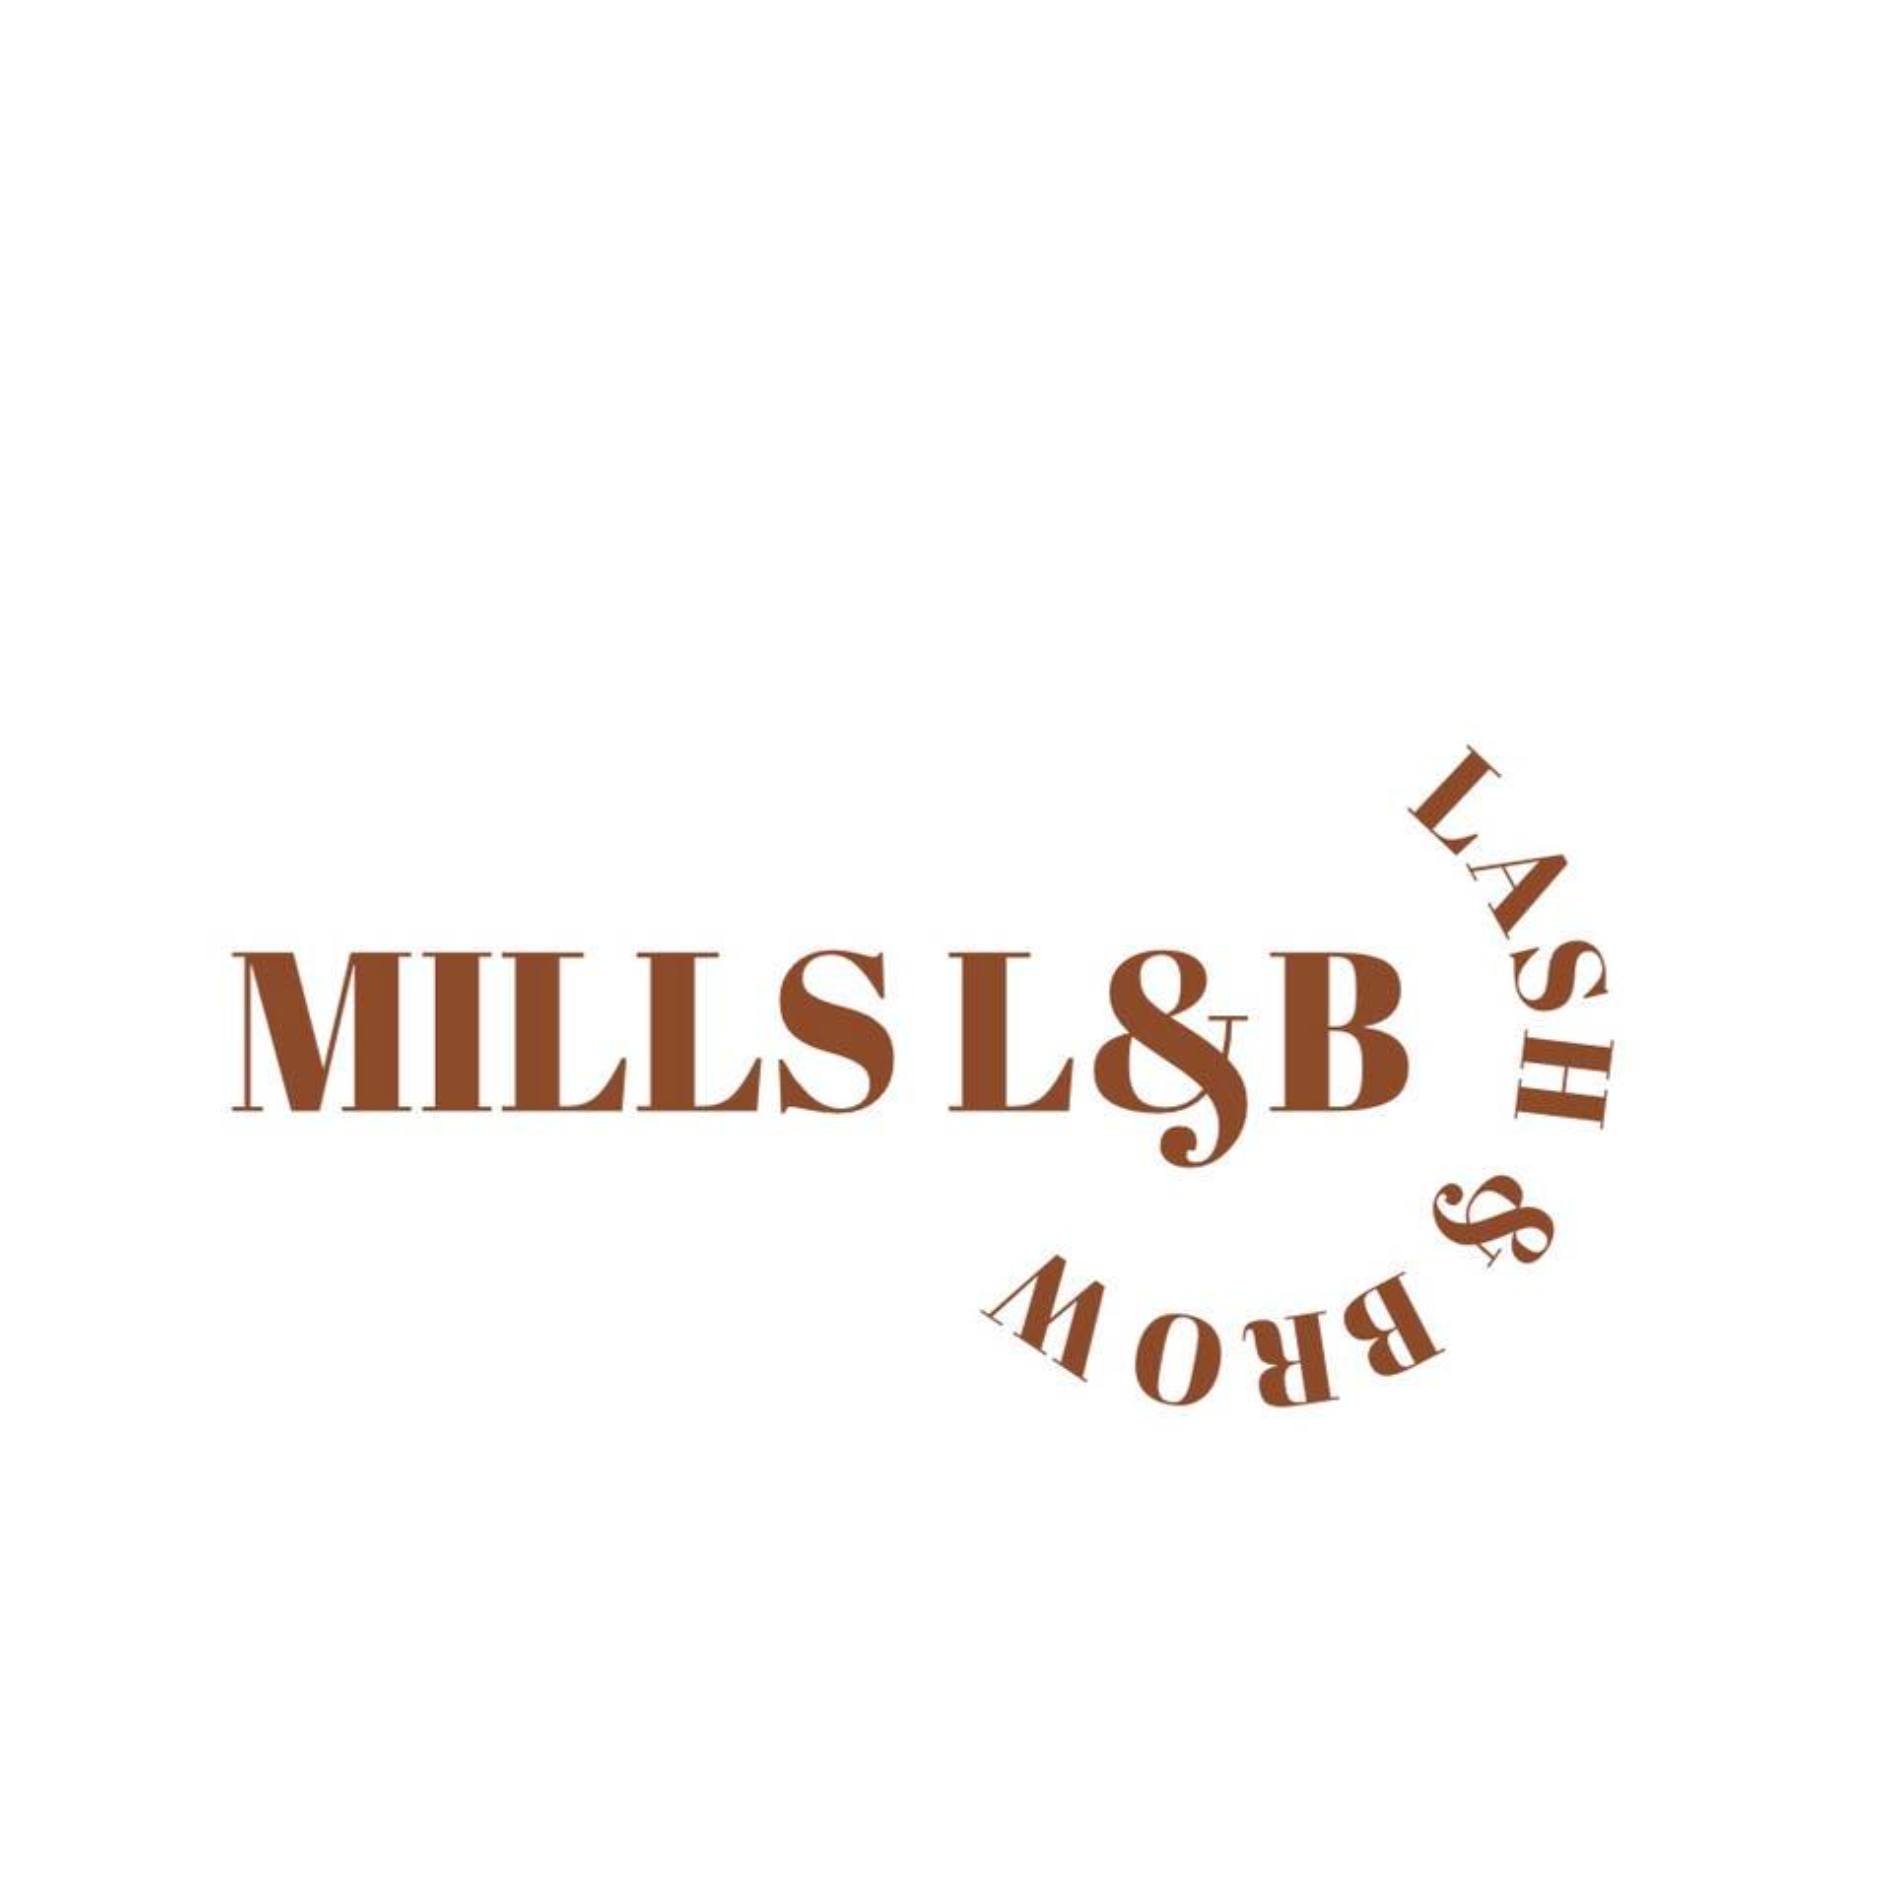 Introducing Mills Lash and Brows now located within Found Wellness. 🤍

Mills Lash and Brows specialises in Lashes, Brows &amp; Cosmetic Tattoos!
We look forward to welcoming you into our space permanently.

 #welcometofound #foundwellness